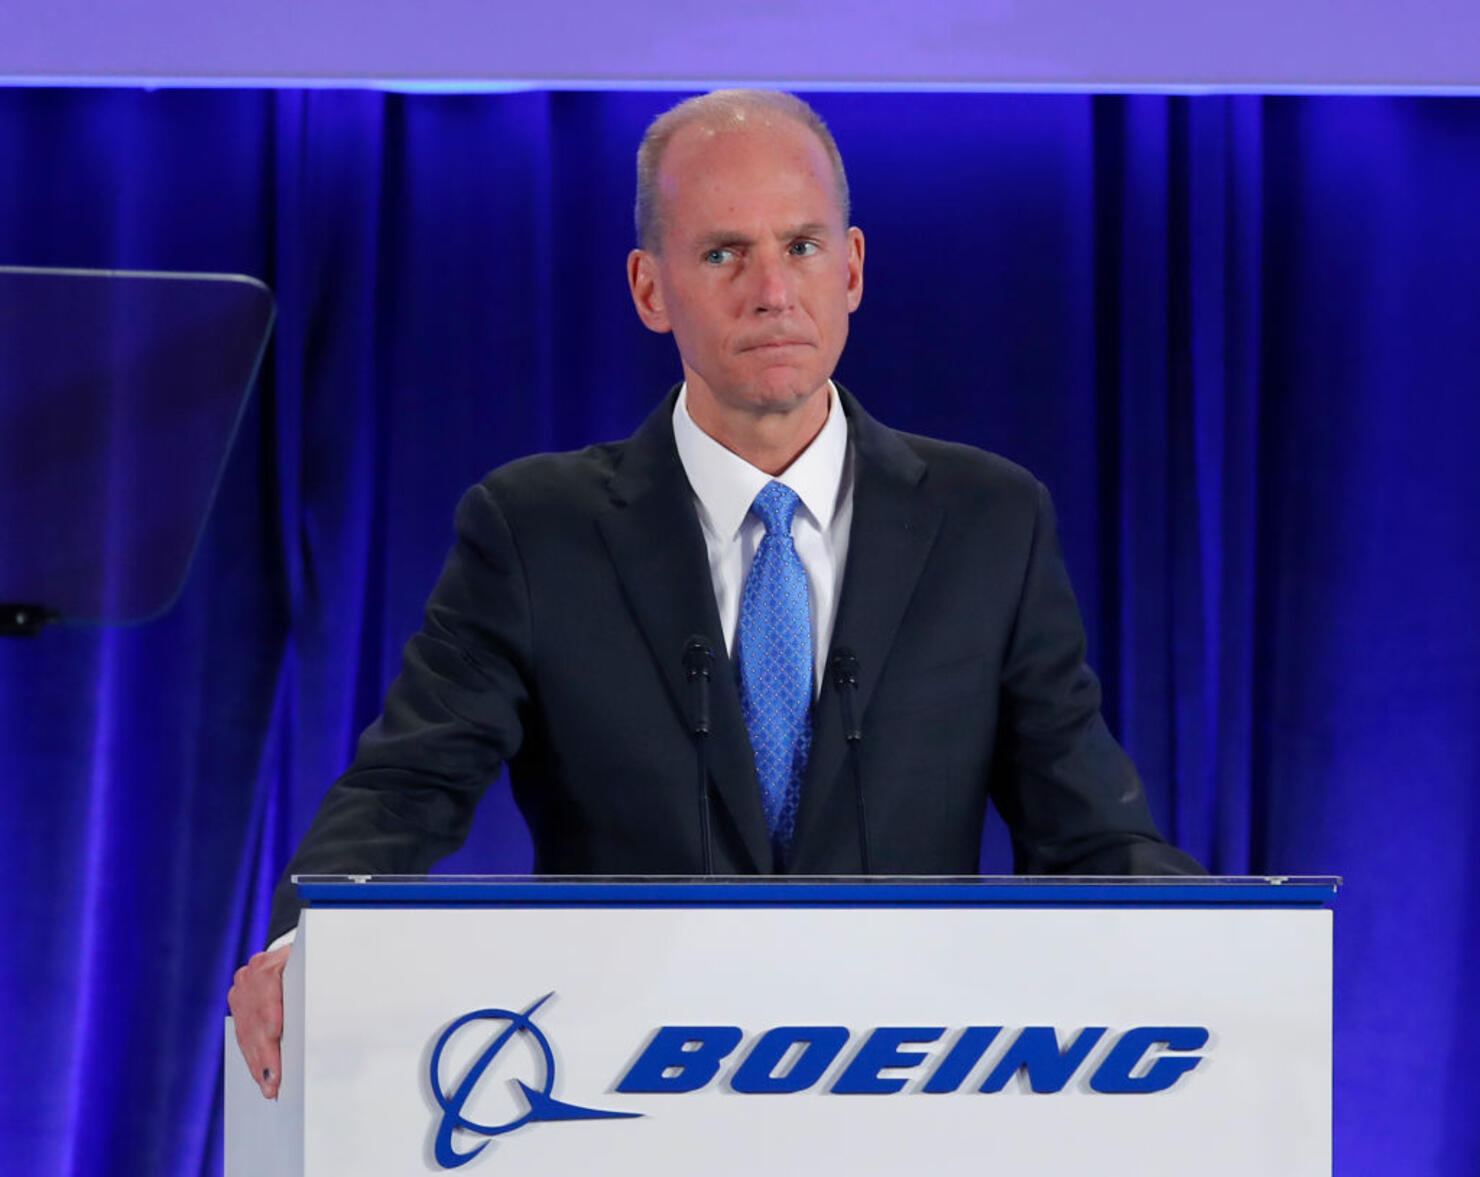 Boeing Holds Annual Shareholders Meeting In Chicago